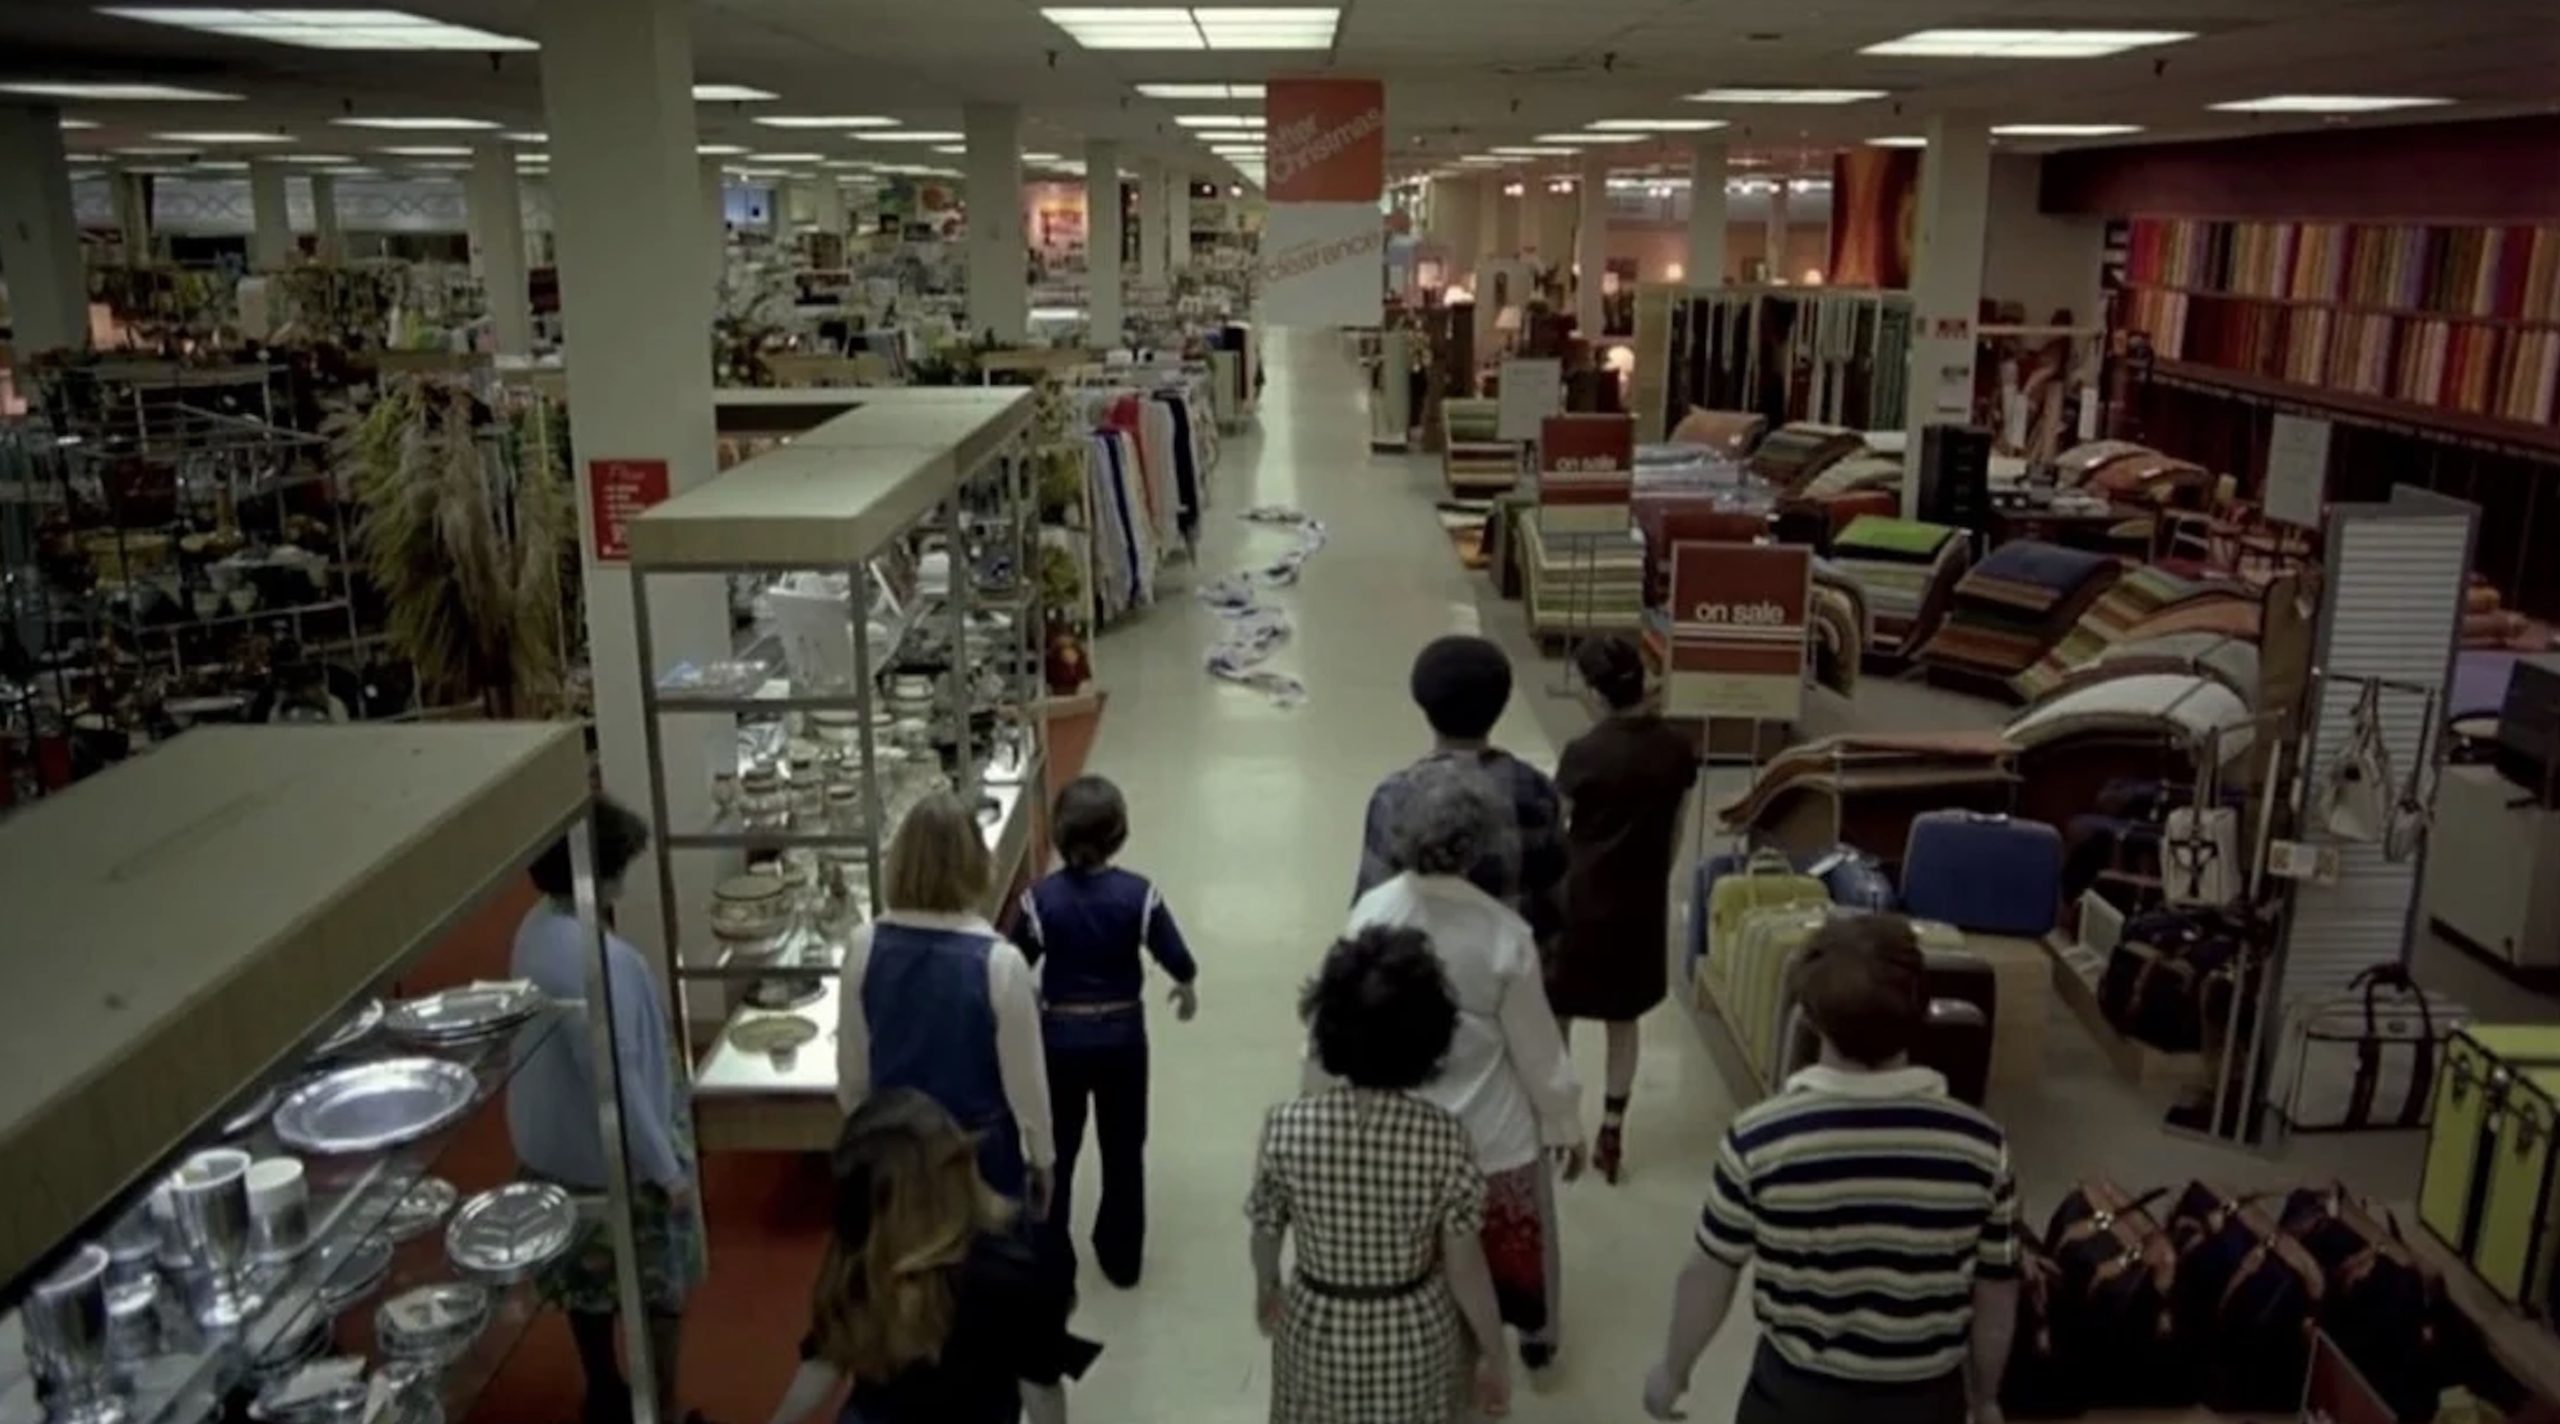 In this frame from Romero's Dawn of the Dead, a group of zombies stand with their backs to the camera in the foreground of the image. The rest of the shot shows an empty department store with a blood-stained cloth lying in the center of the aisle. 